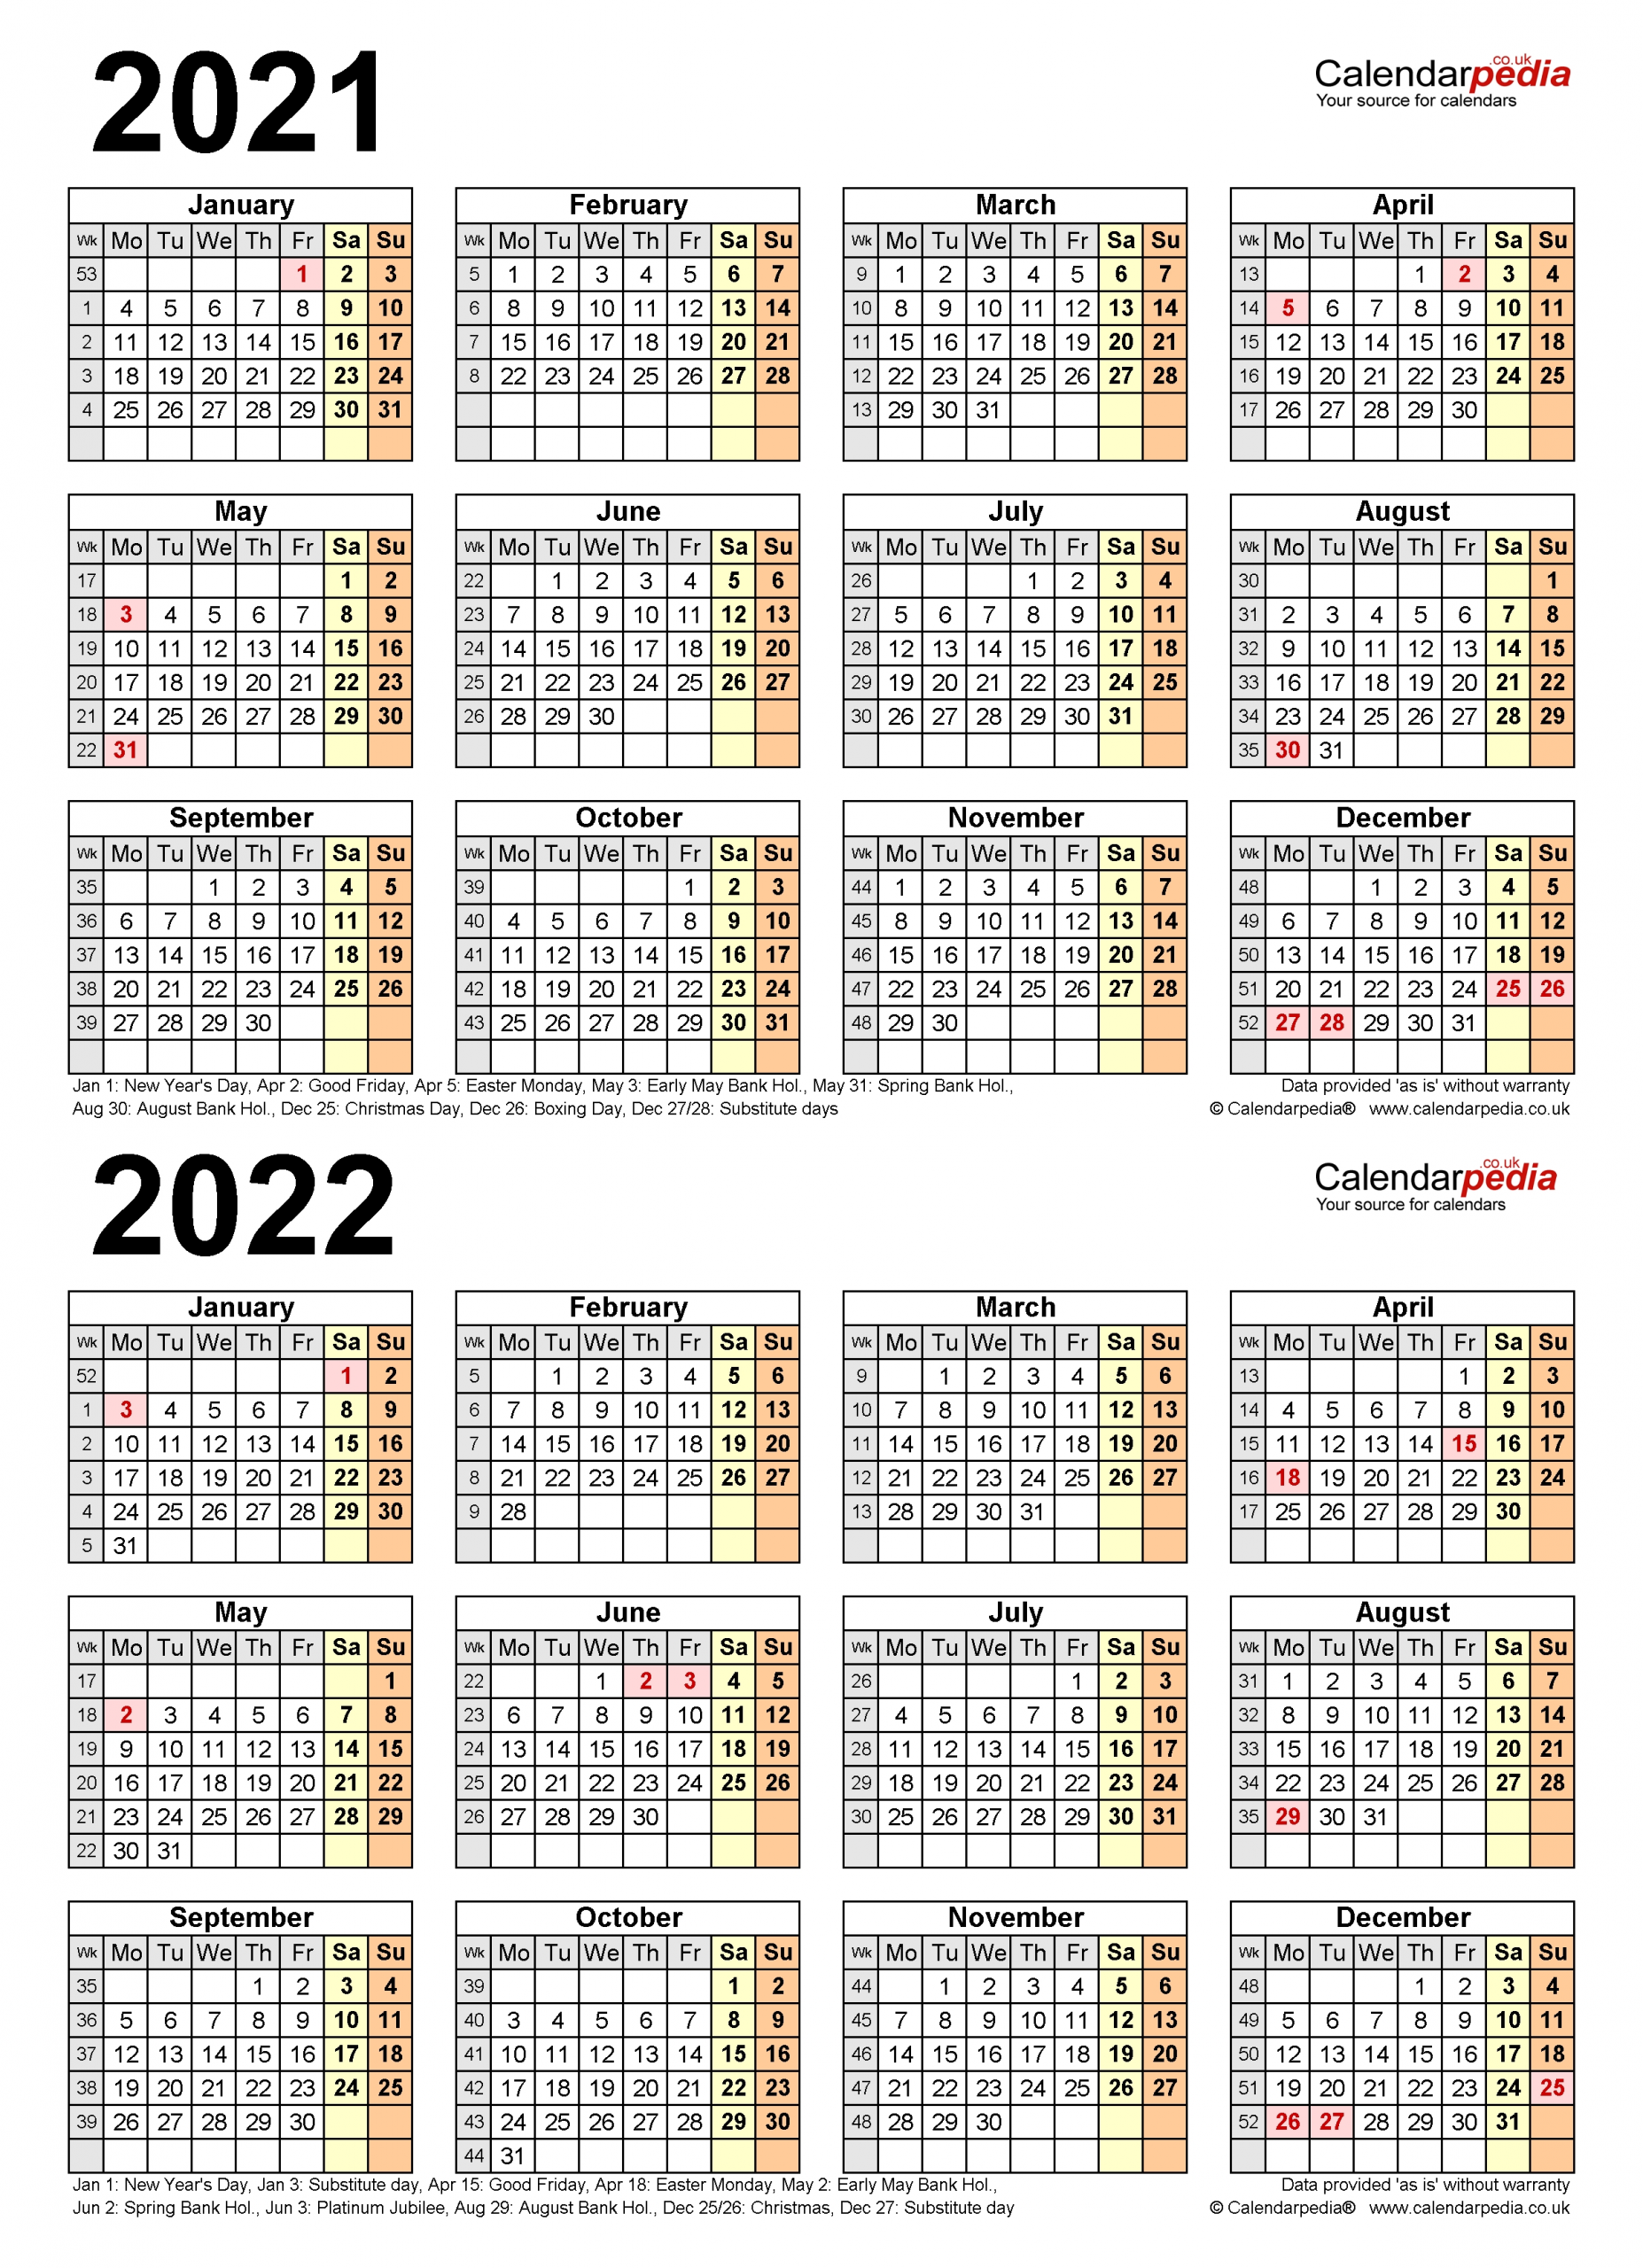 Two Year Calendars For 2021 &amp; 2022 (Uk) For Pdf